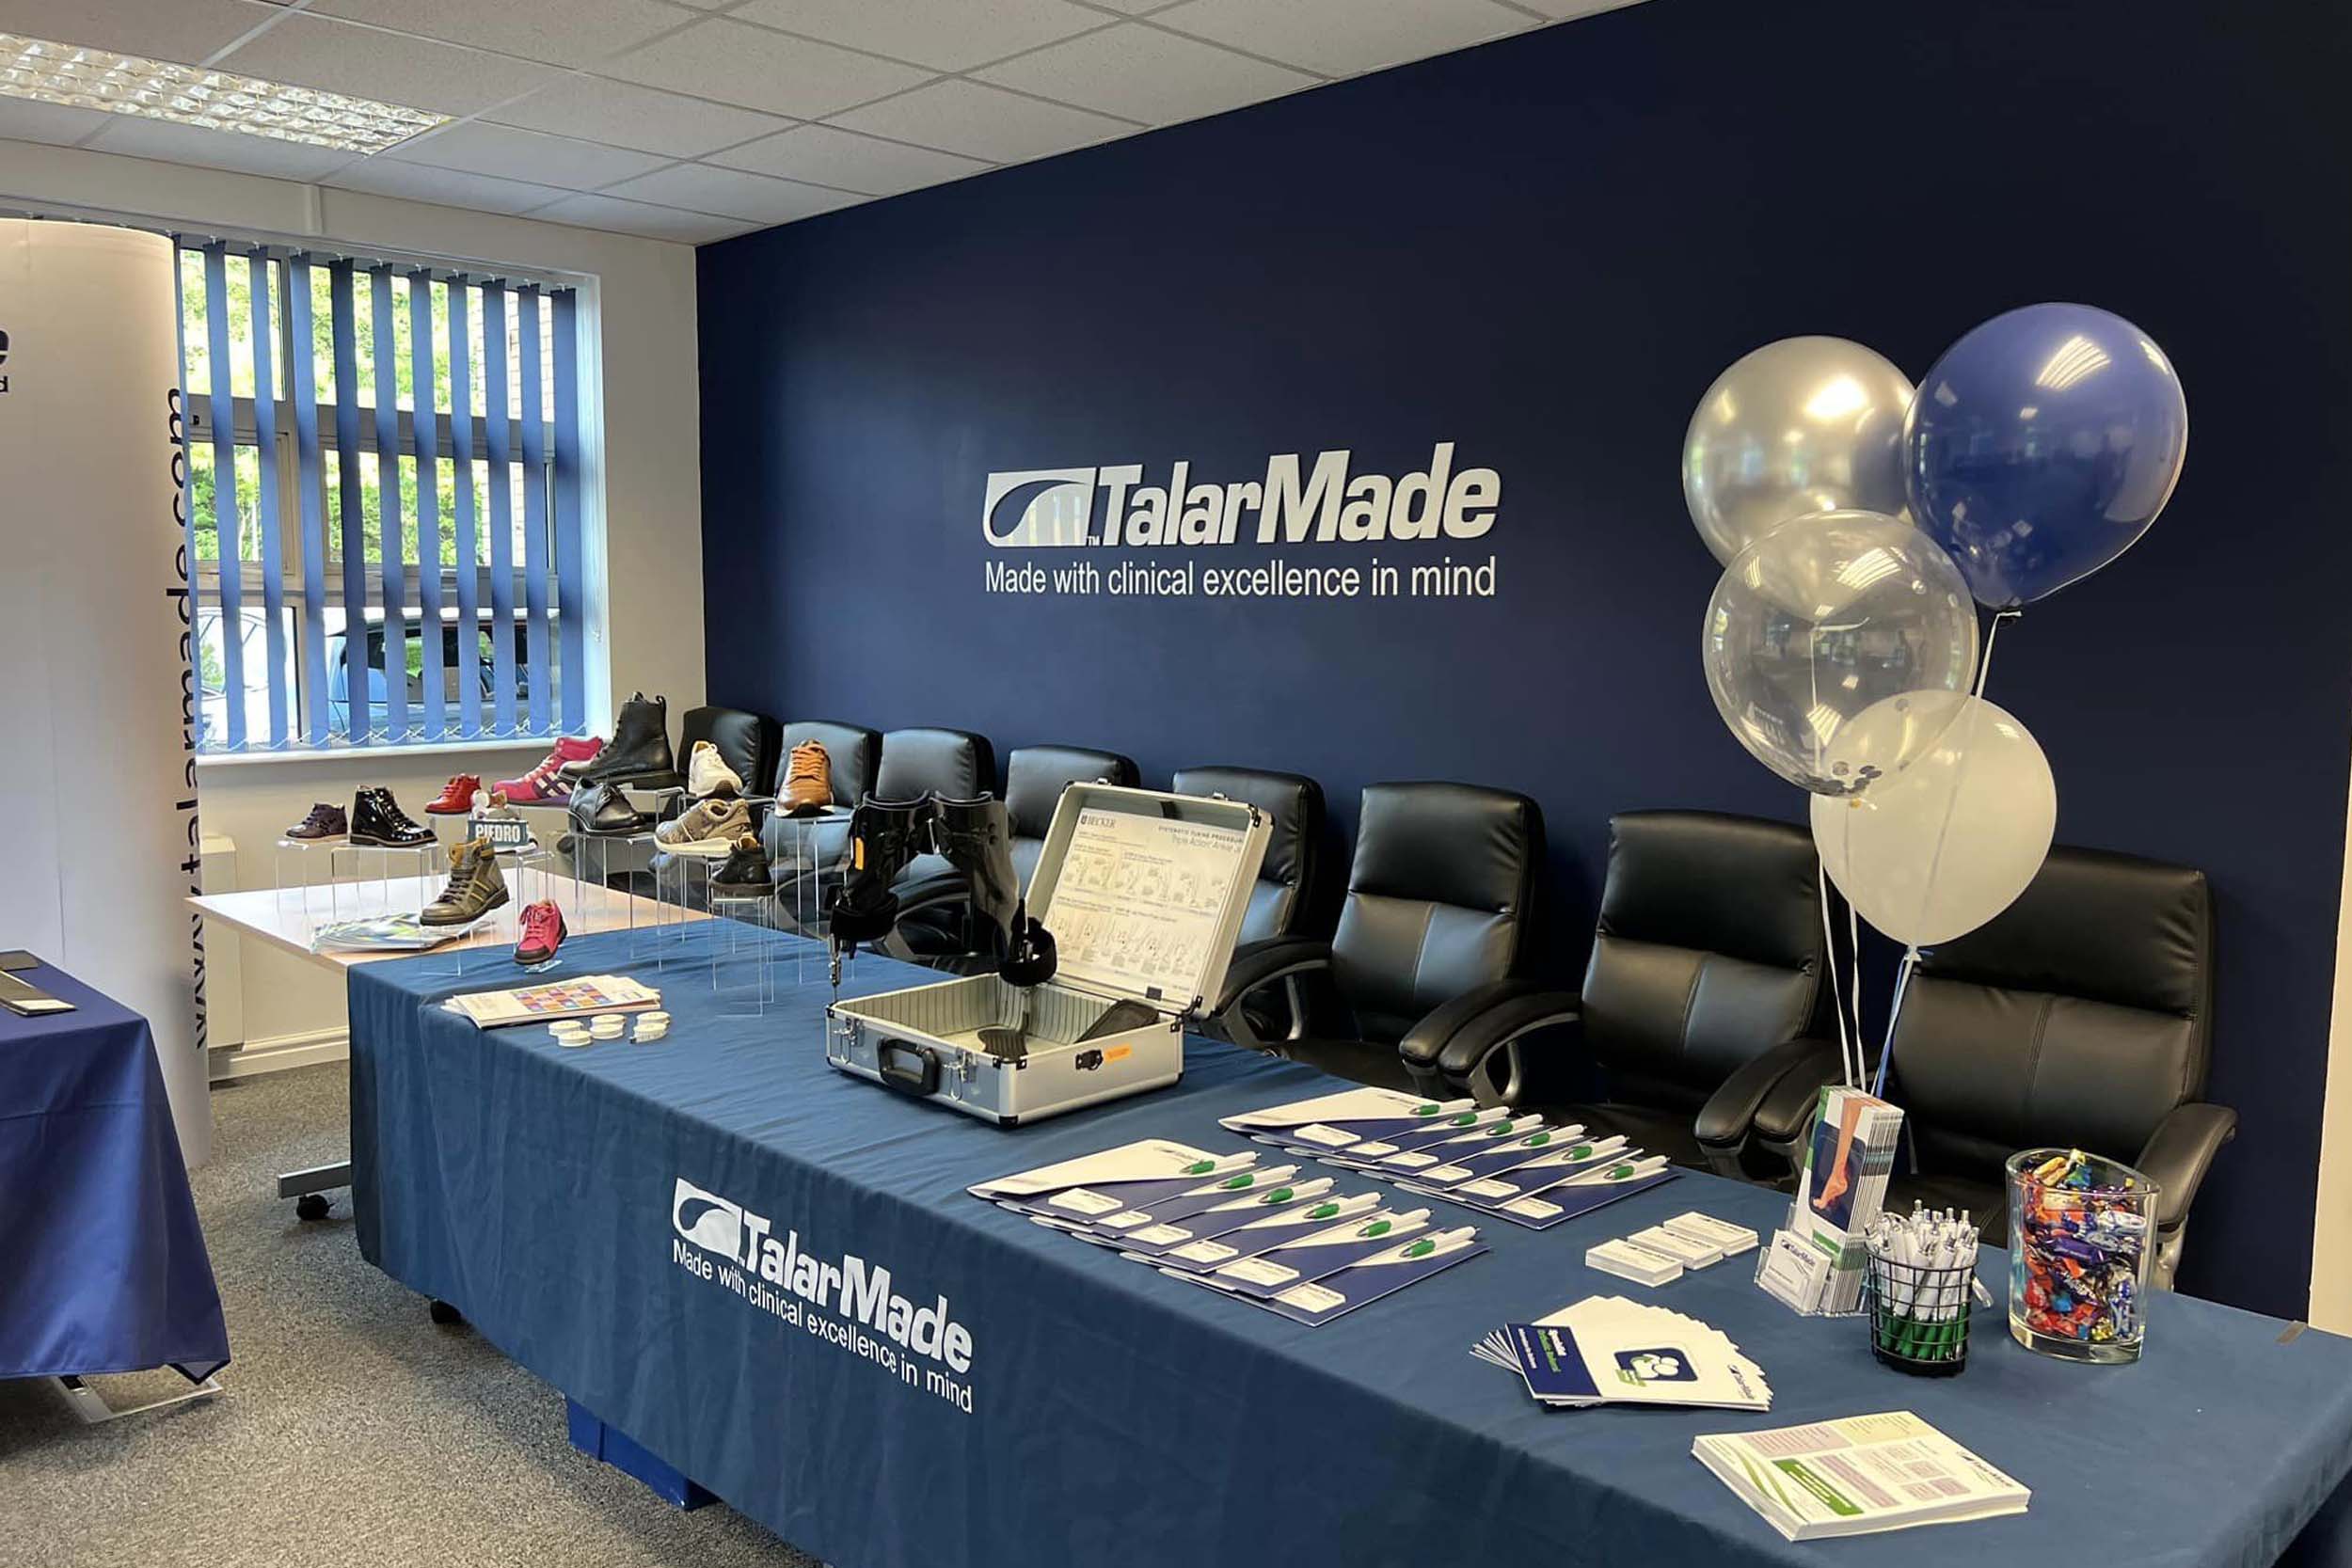 Our first TalarMade Clinic Open day is up and running!